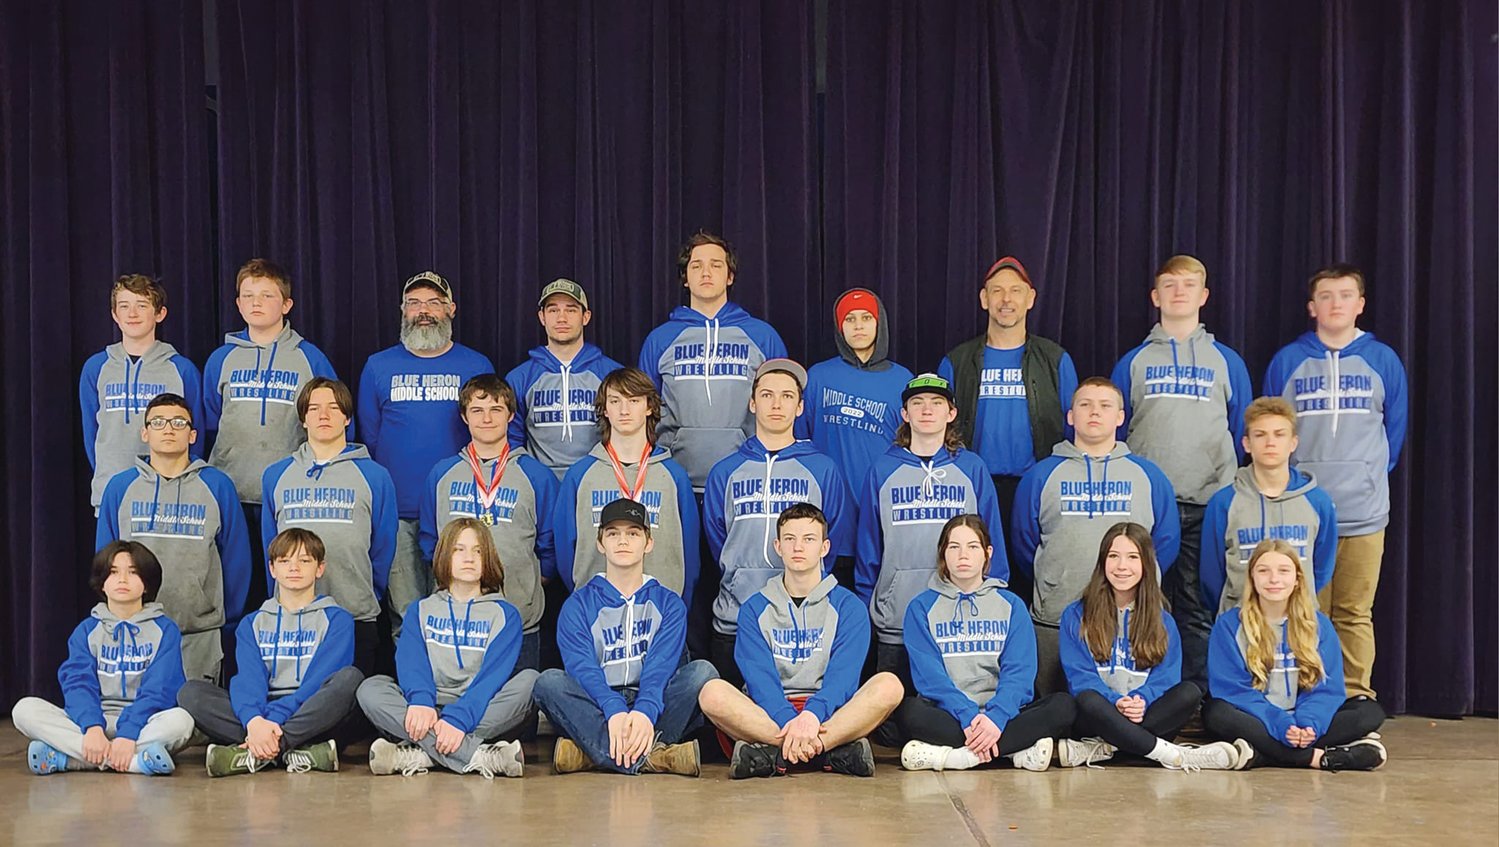 Wearing their Blue Heron garb, the middle school squad poses together at the end-of-year celebration with the highest team turnout ever with 24 kids participating.